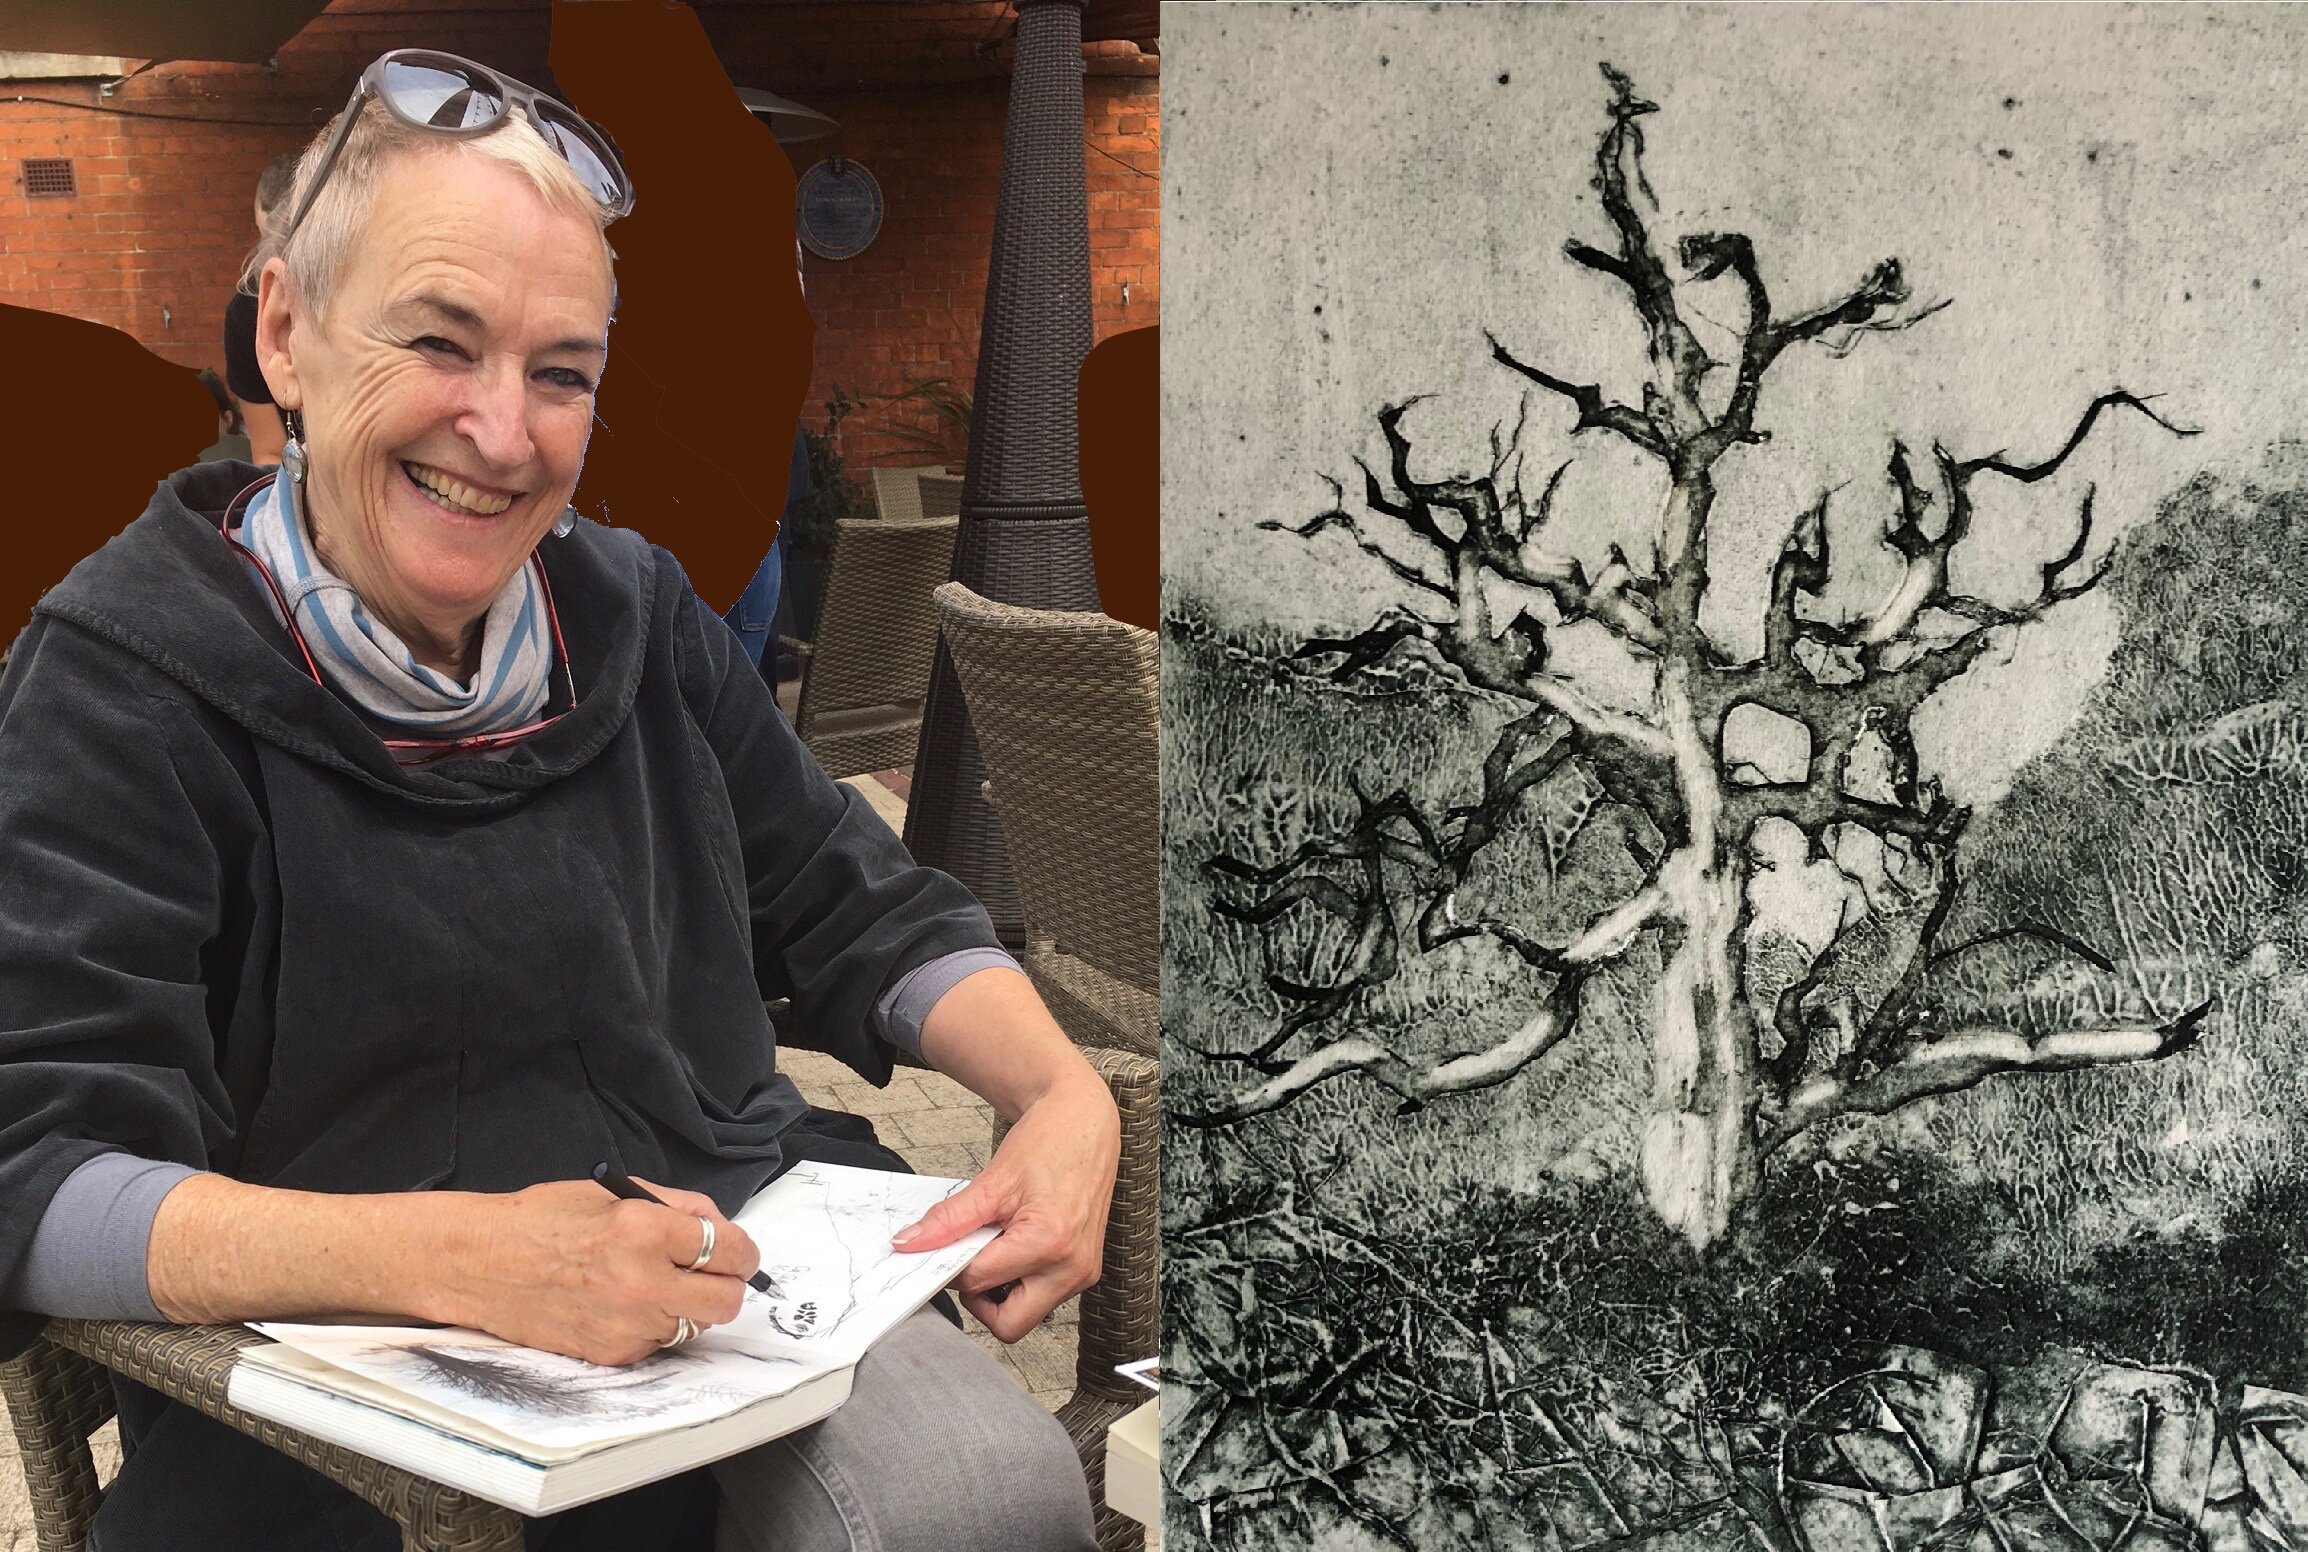 Yorkshire Arboretum Celebrates Art and Science with New Artist in Residence